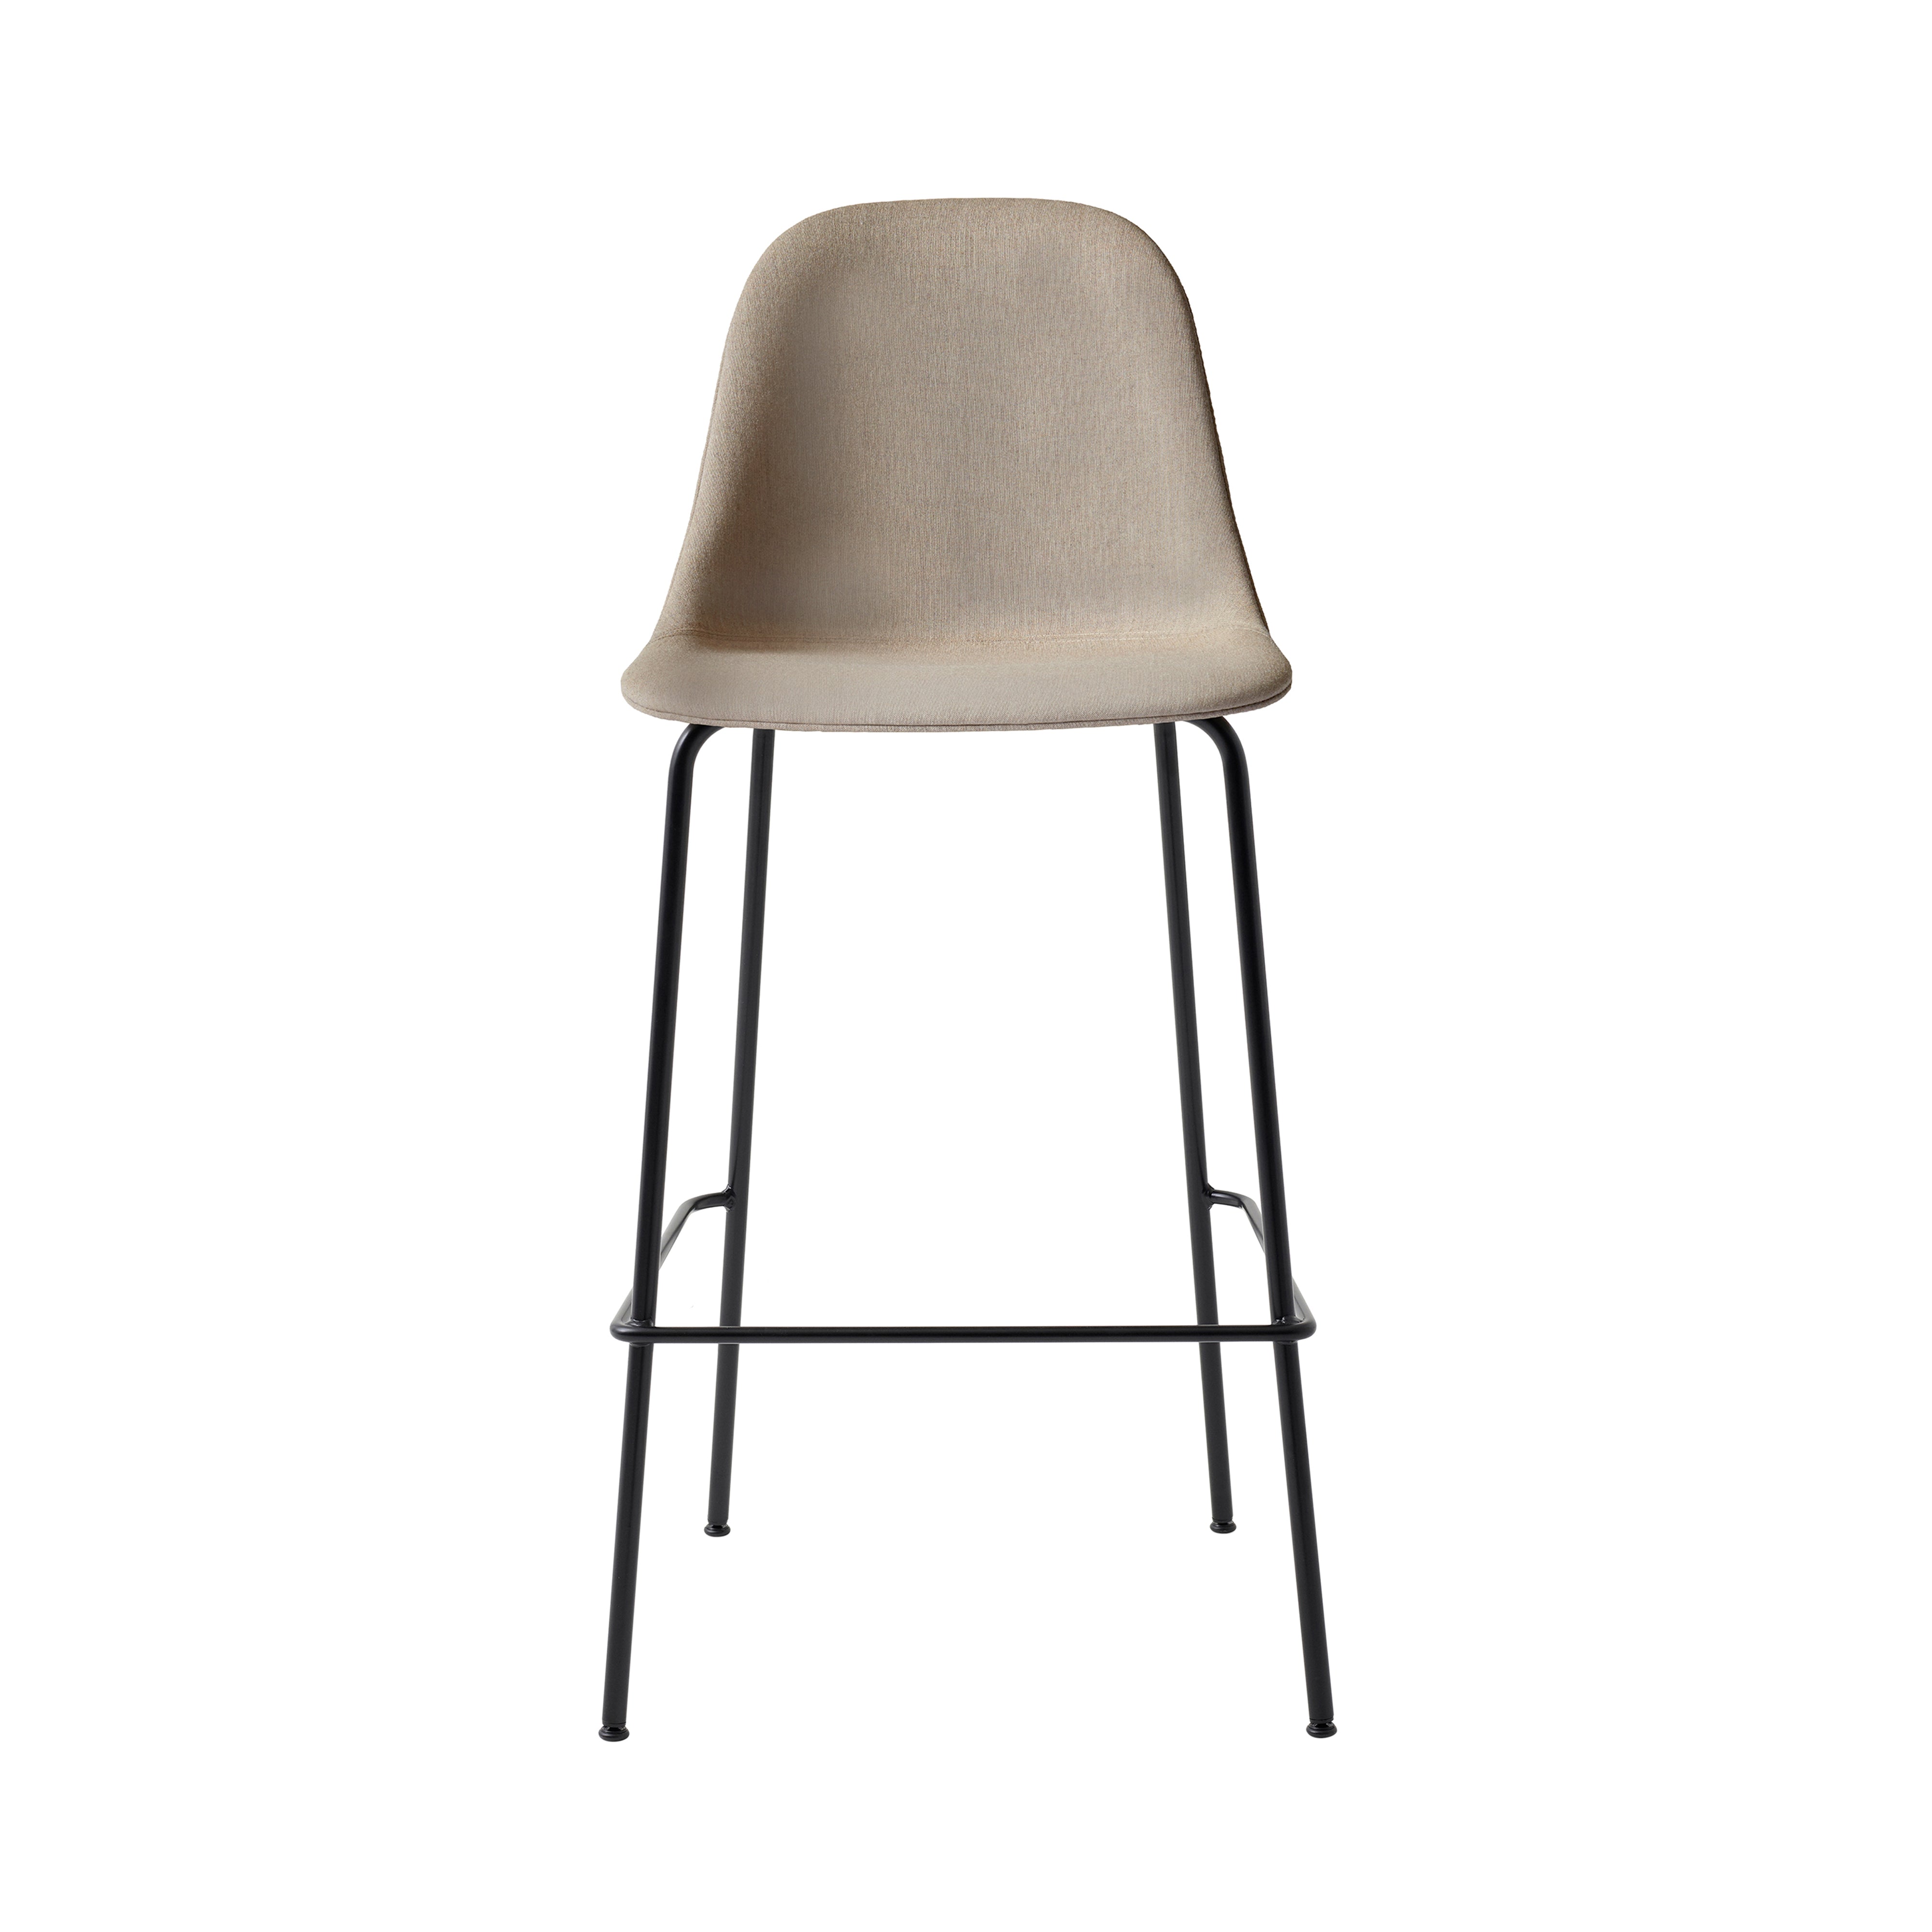 Harbour Bar + Counter Side Chair: Steel Base Upholstered + Bar + Remix3 233